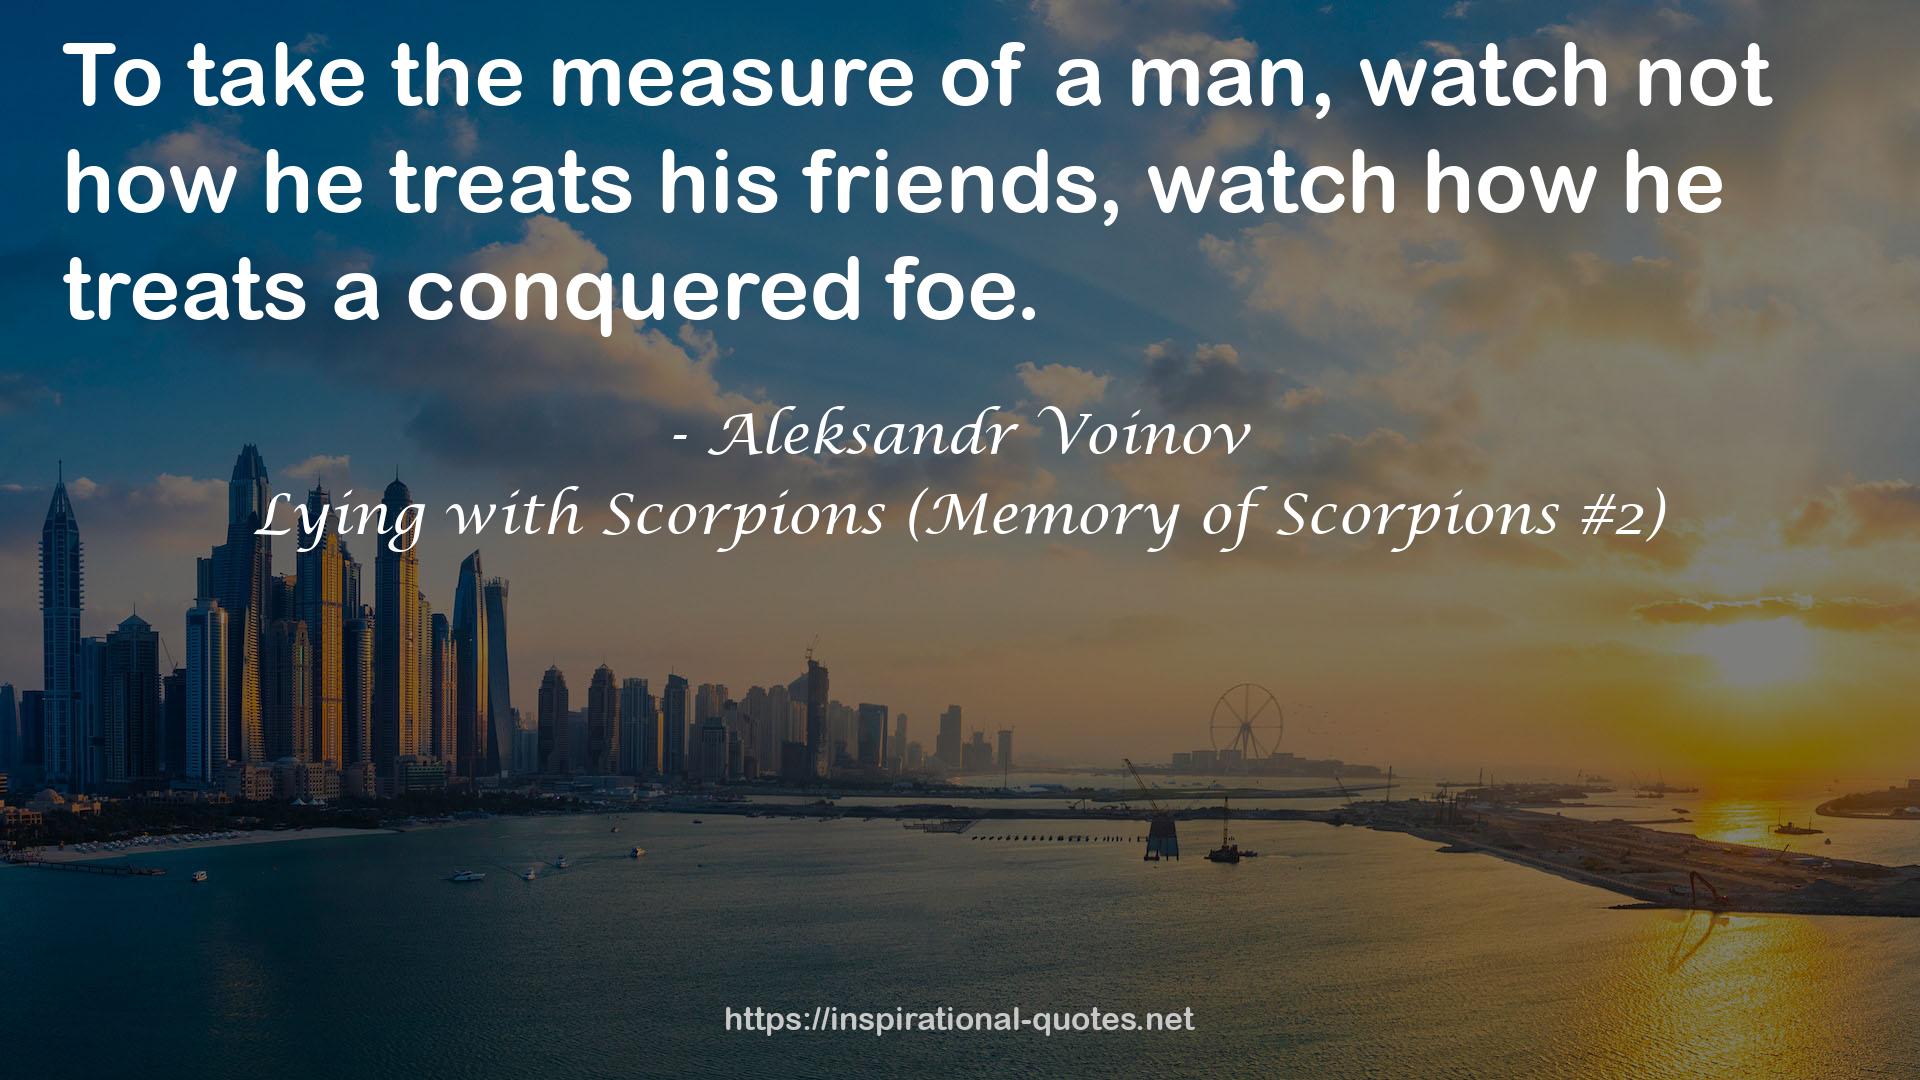 Lying with Scorpions (Memory of Scorpions #2) QUOTES